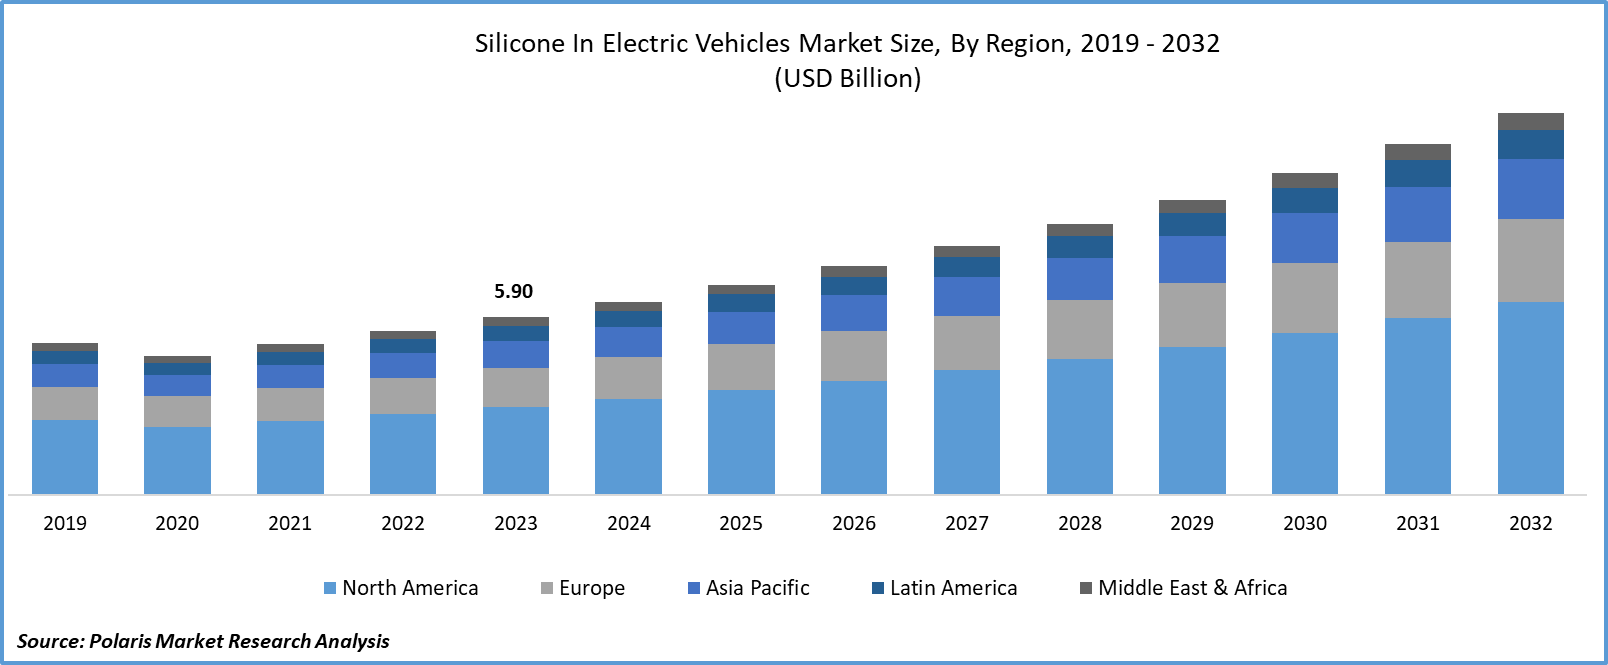 Silicone In Electric Vehicles Market Size